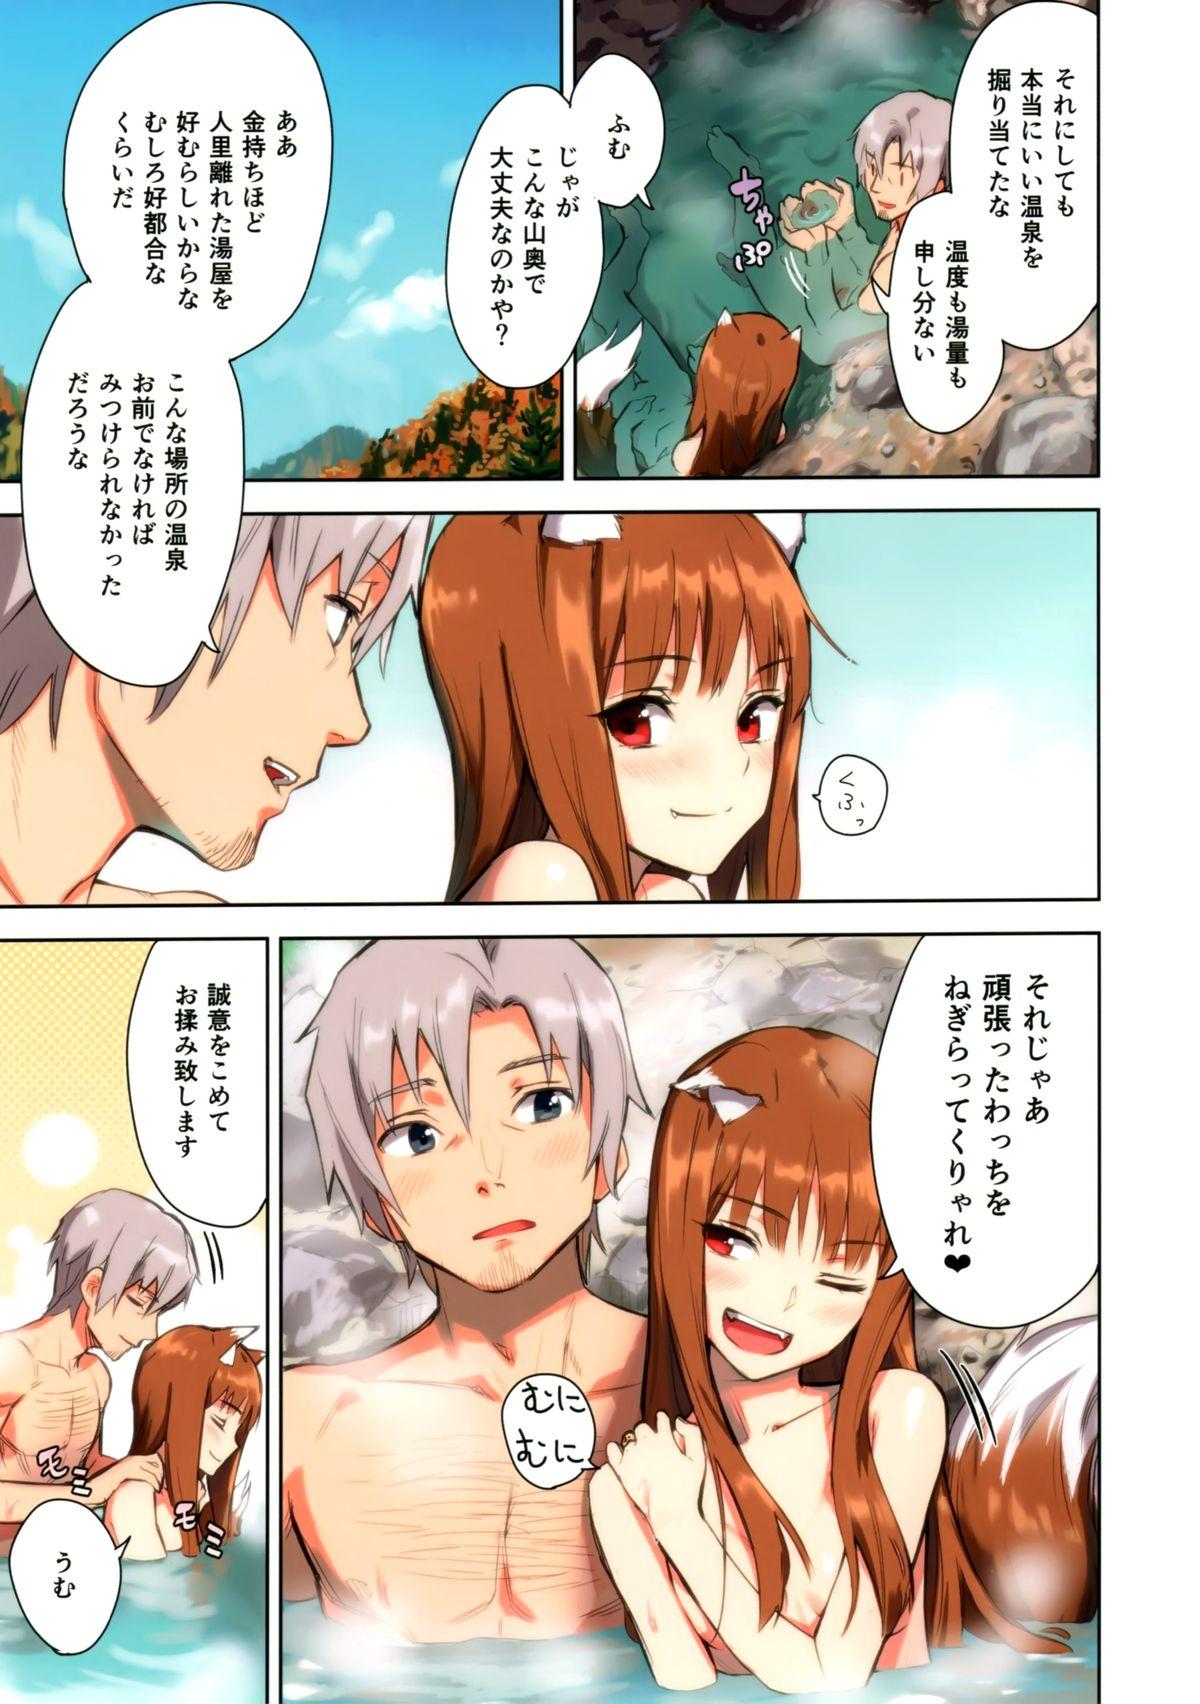 Moaning Wacchi to Nyohhira Bon FULL COLOR - Spice and wolf Porno Amateur - Page 7